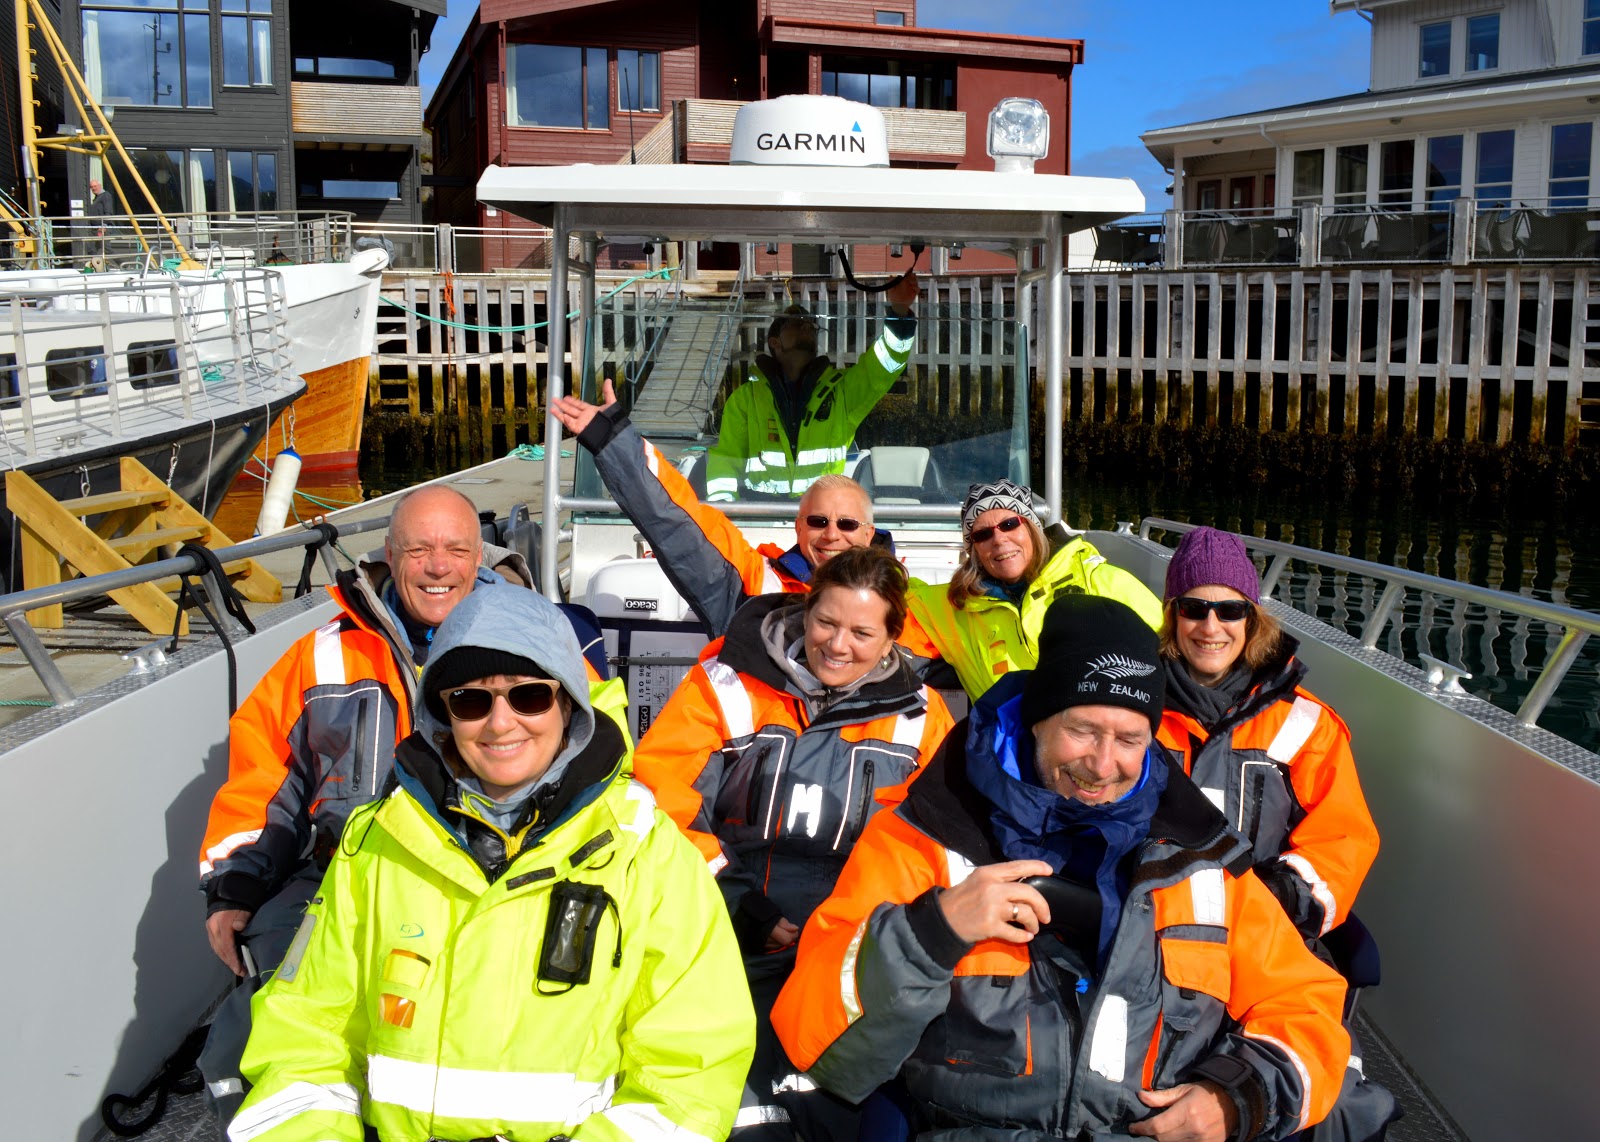 On board and anxiously awaiting our skippers to get underway on our sea safari in Senja, Norway. Photo: Gøril Vicki Ovesen. Unauthorized use is prohibited.